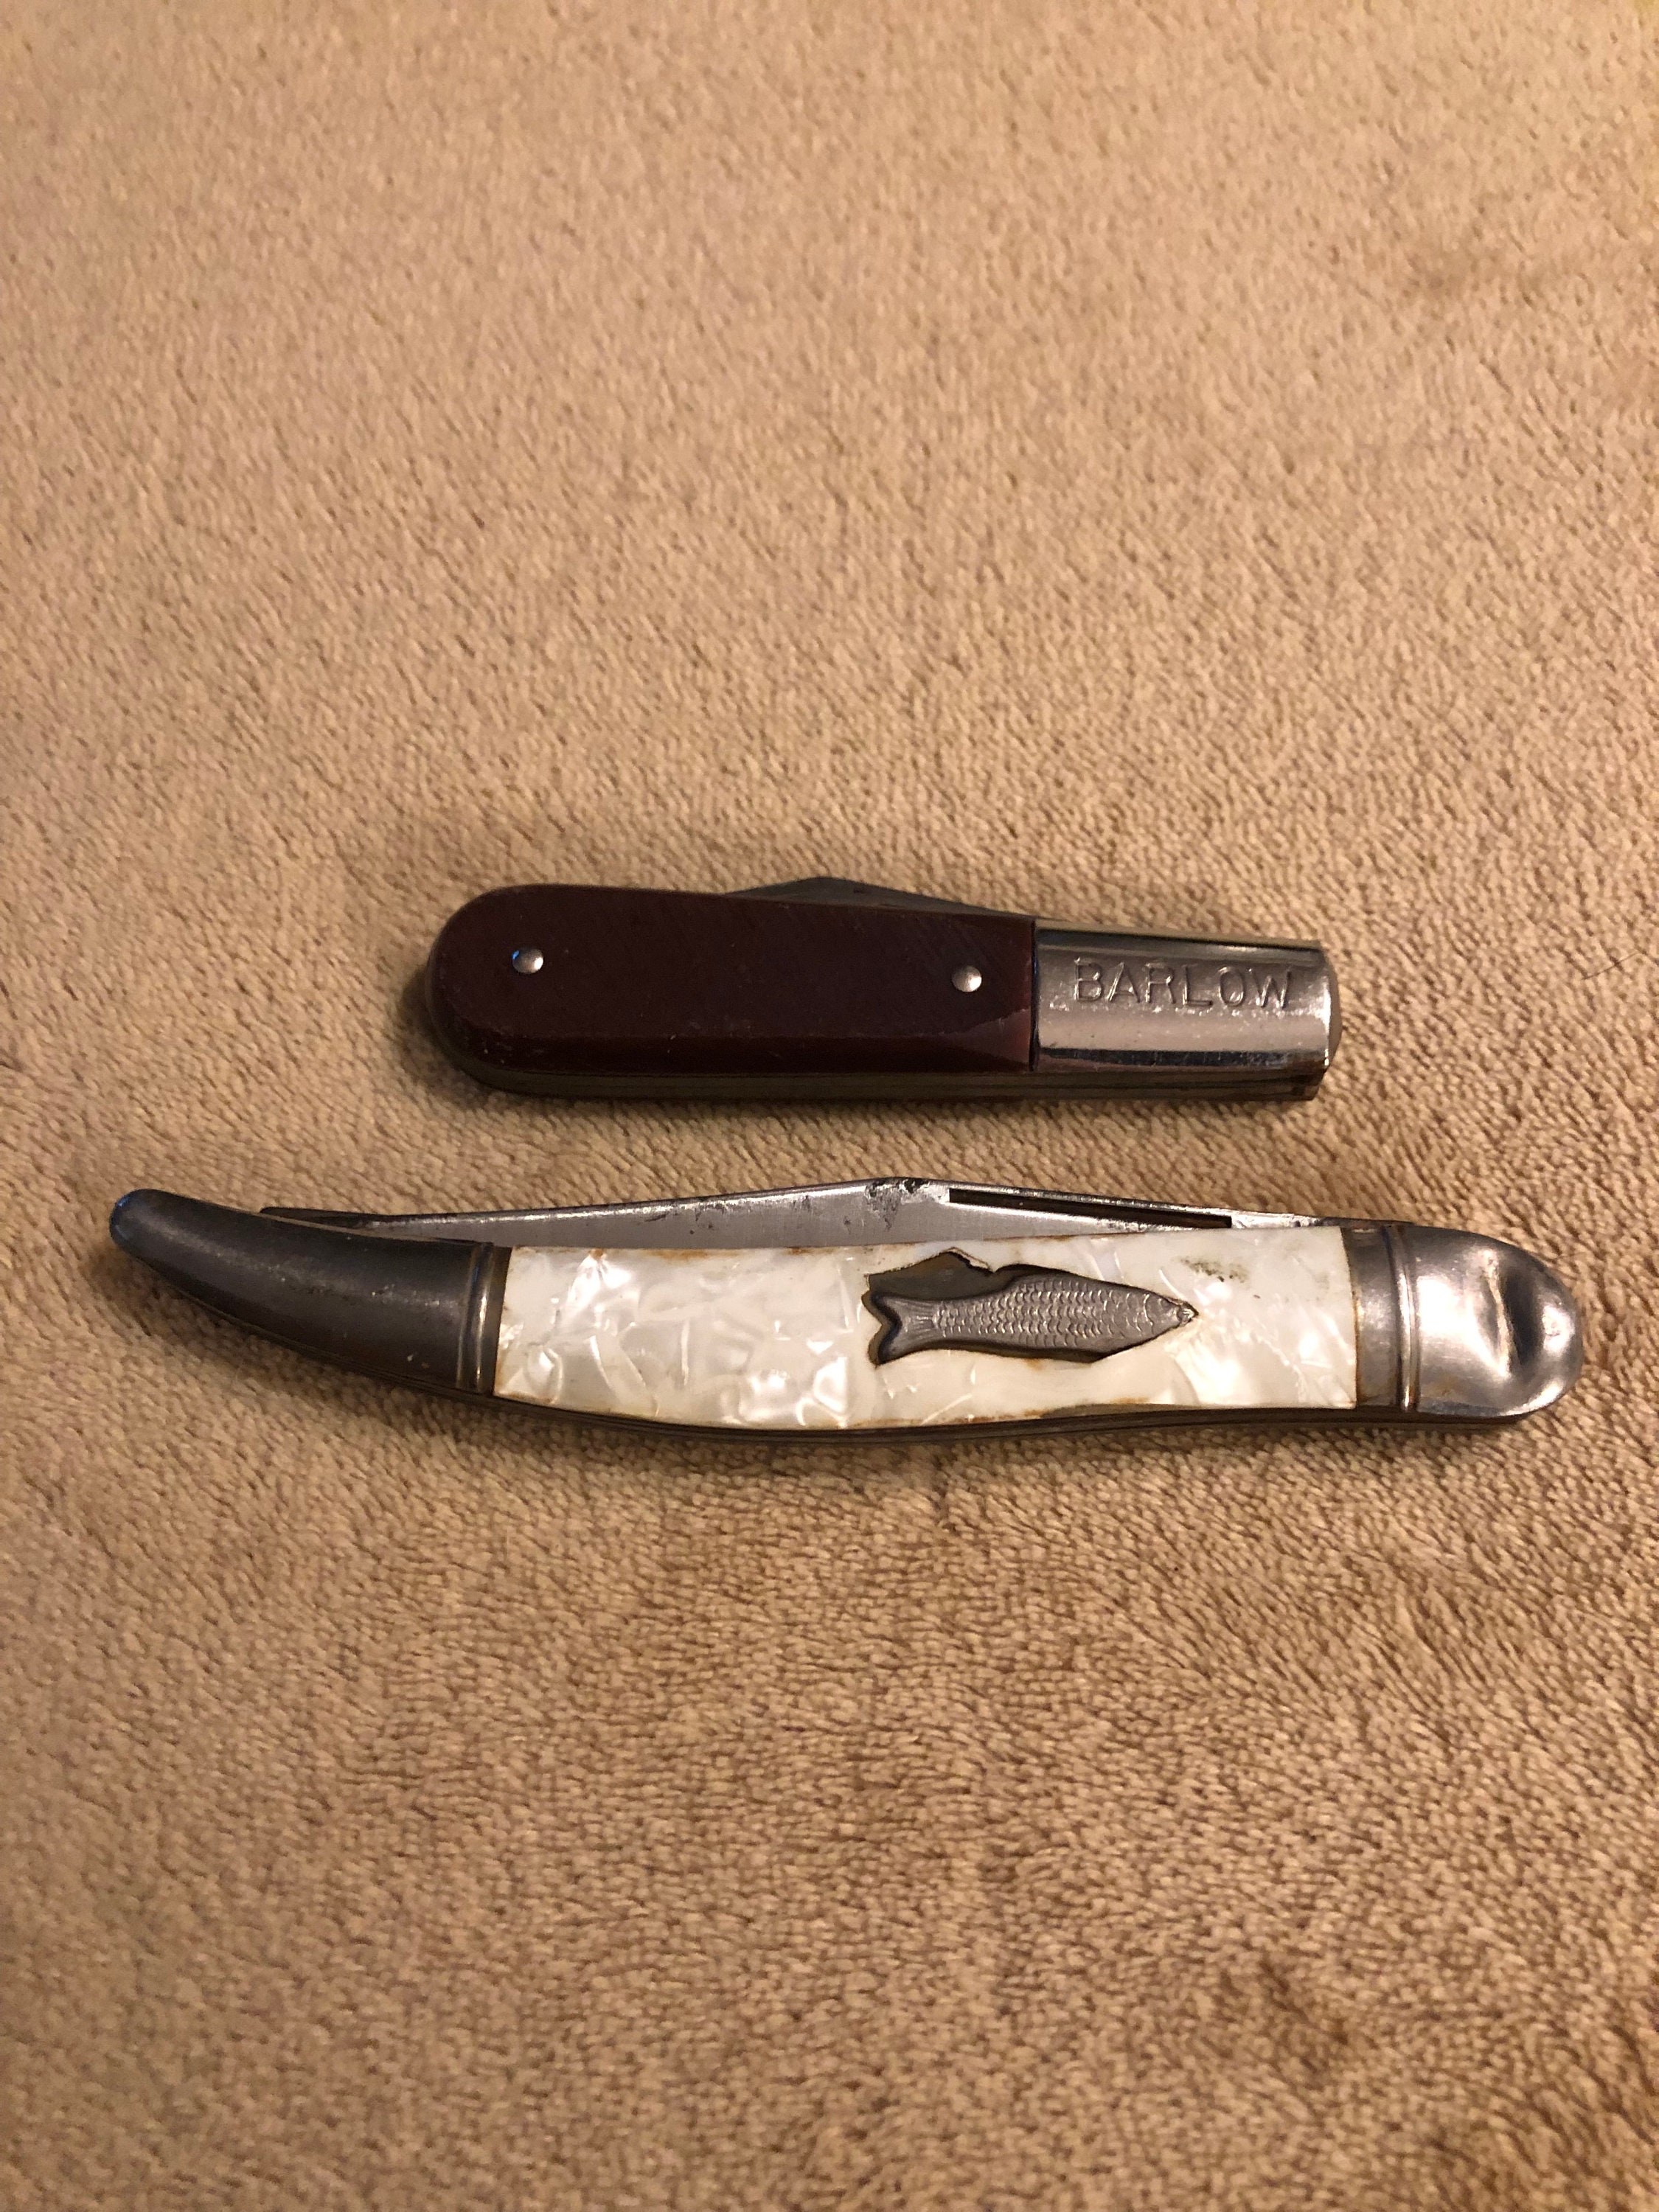 Vintage fishing gaff and filet knife - collectibles - by owner